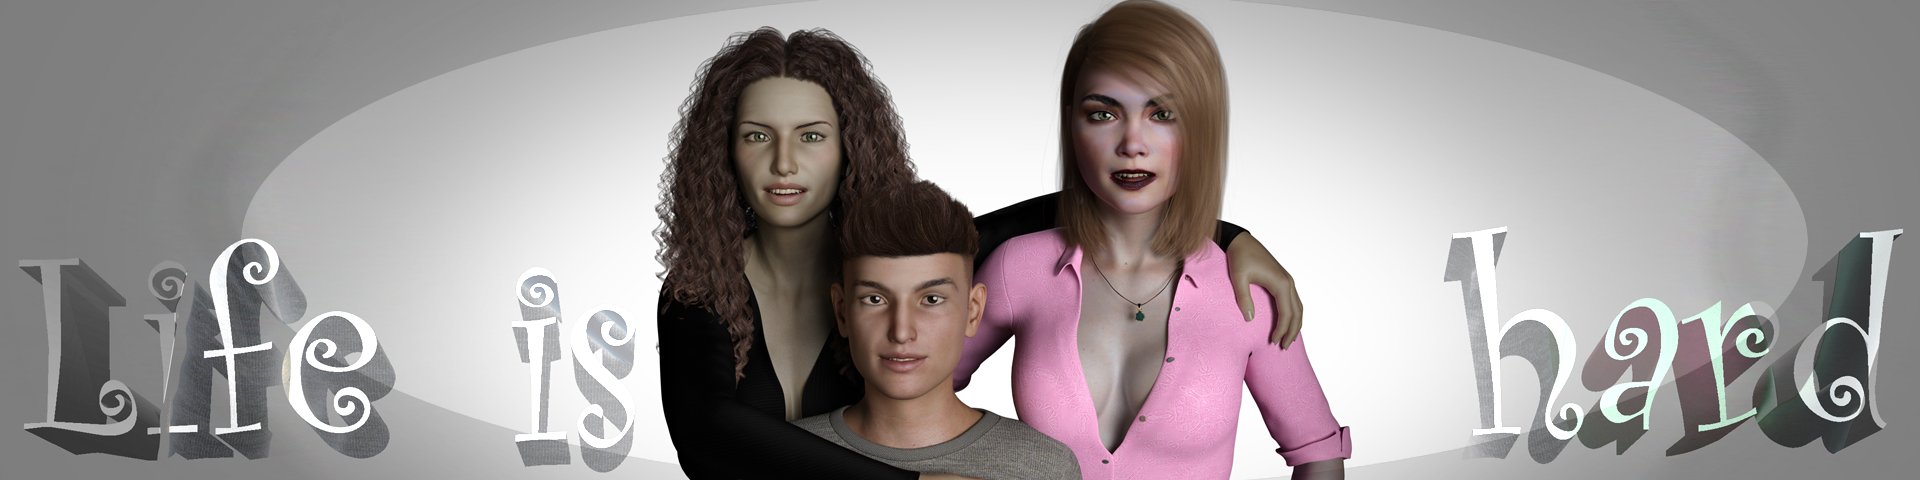 Life is Hard – Version 0.1 - Free patreon family porn game 4